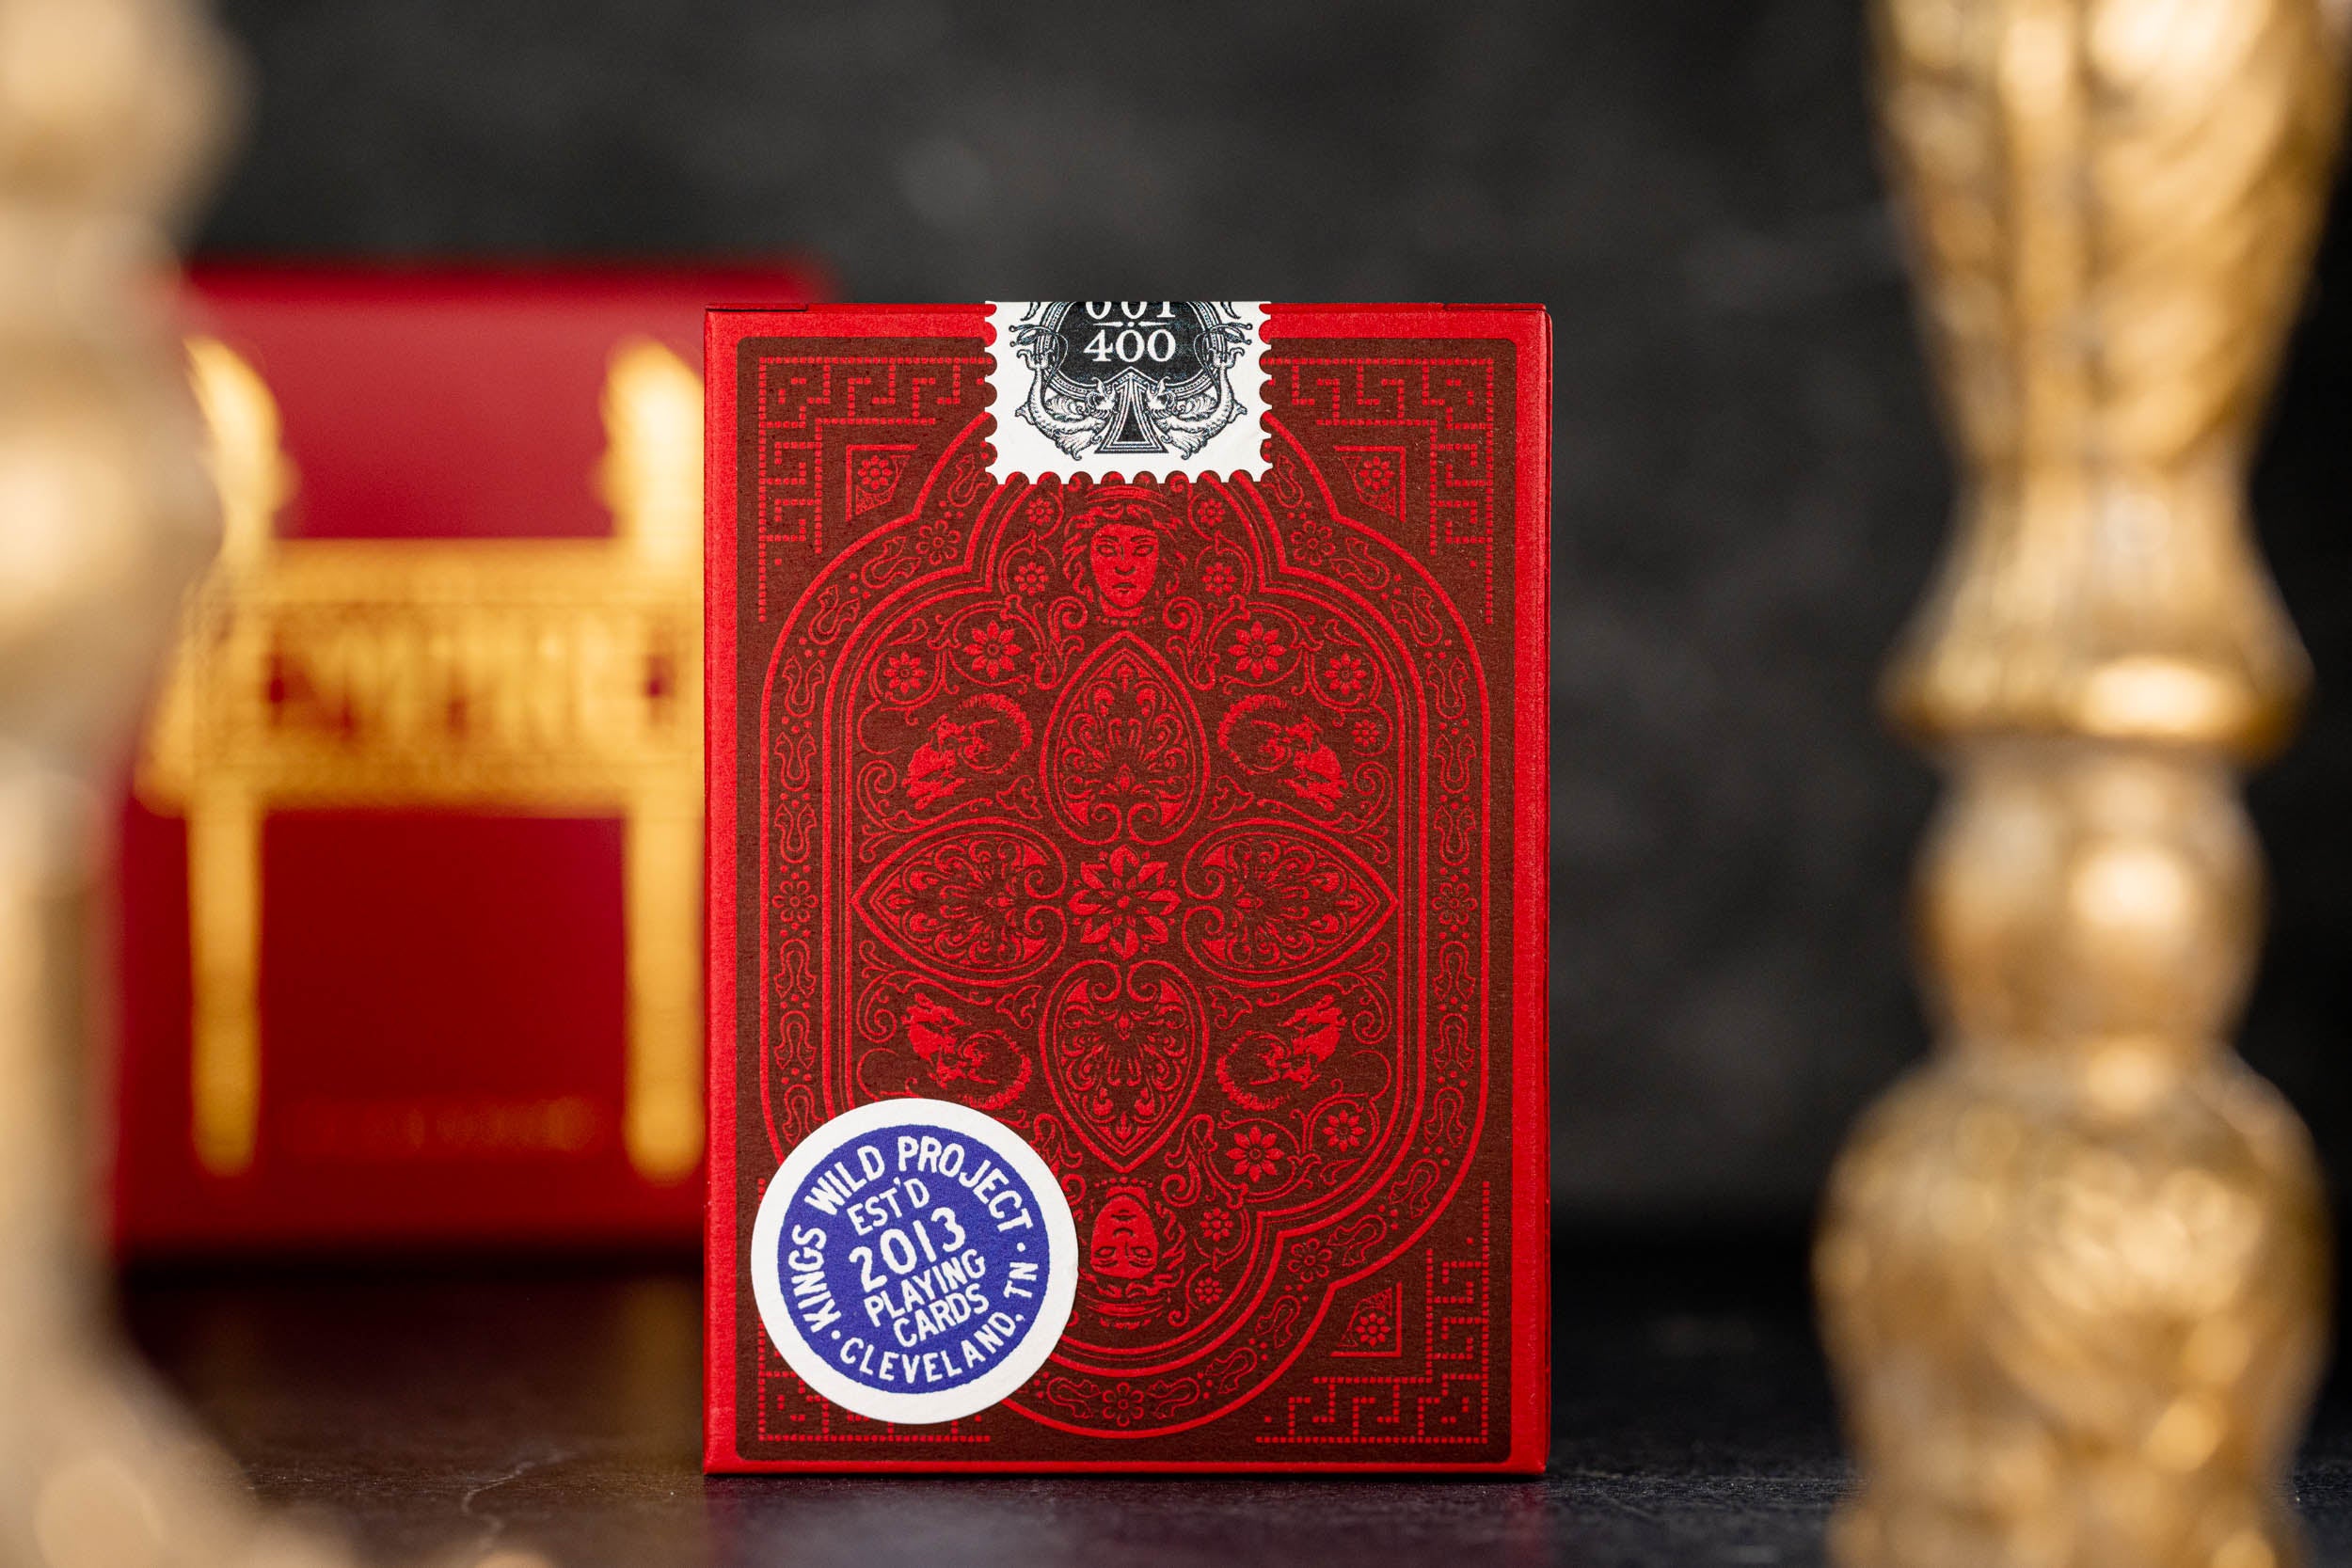 EMPIRE Gilded Edition Luxury Playing Cards